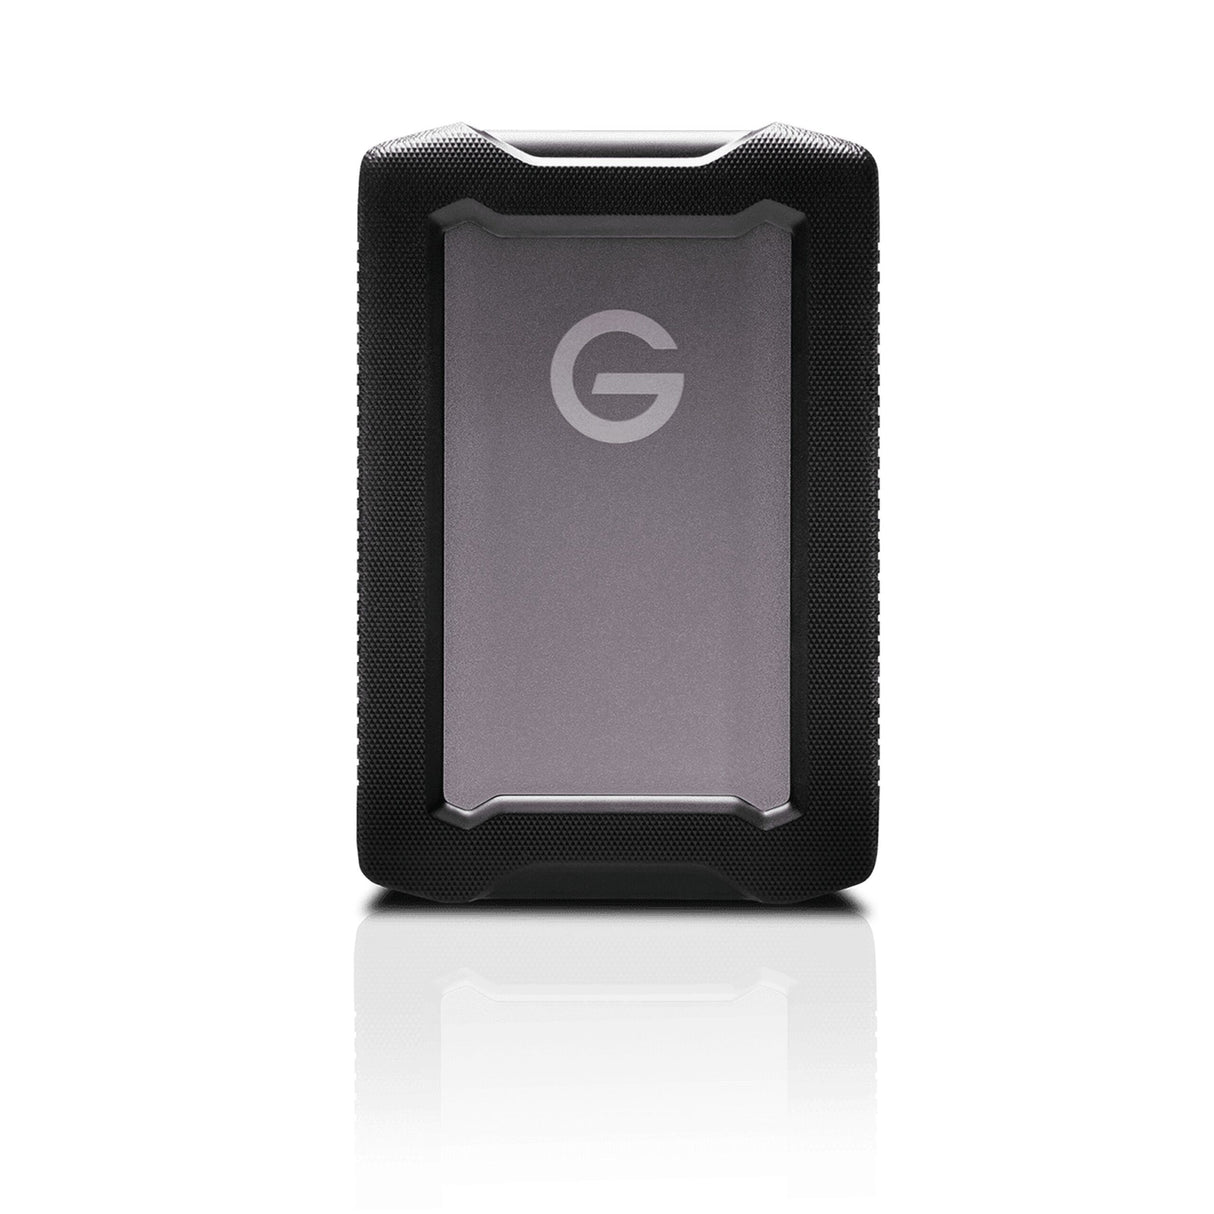 G-Technology G-DRIVE ArmorATD Portable Drive, 4TB (Used)